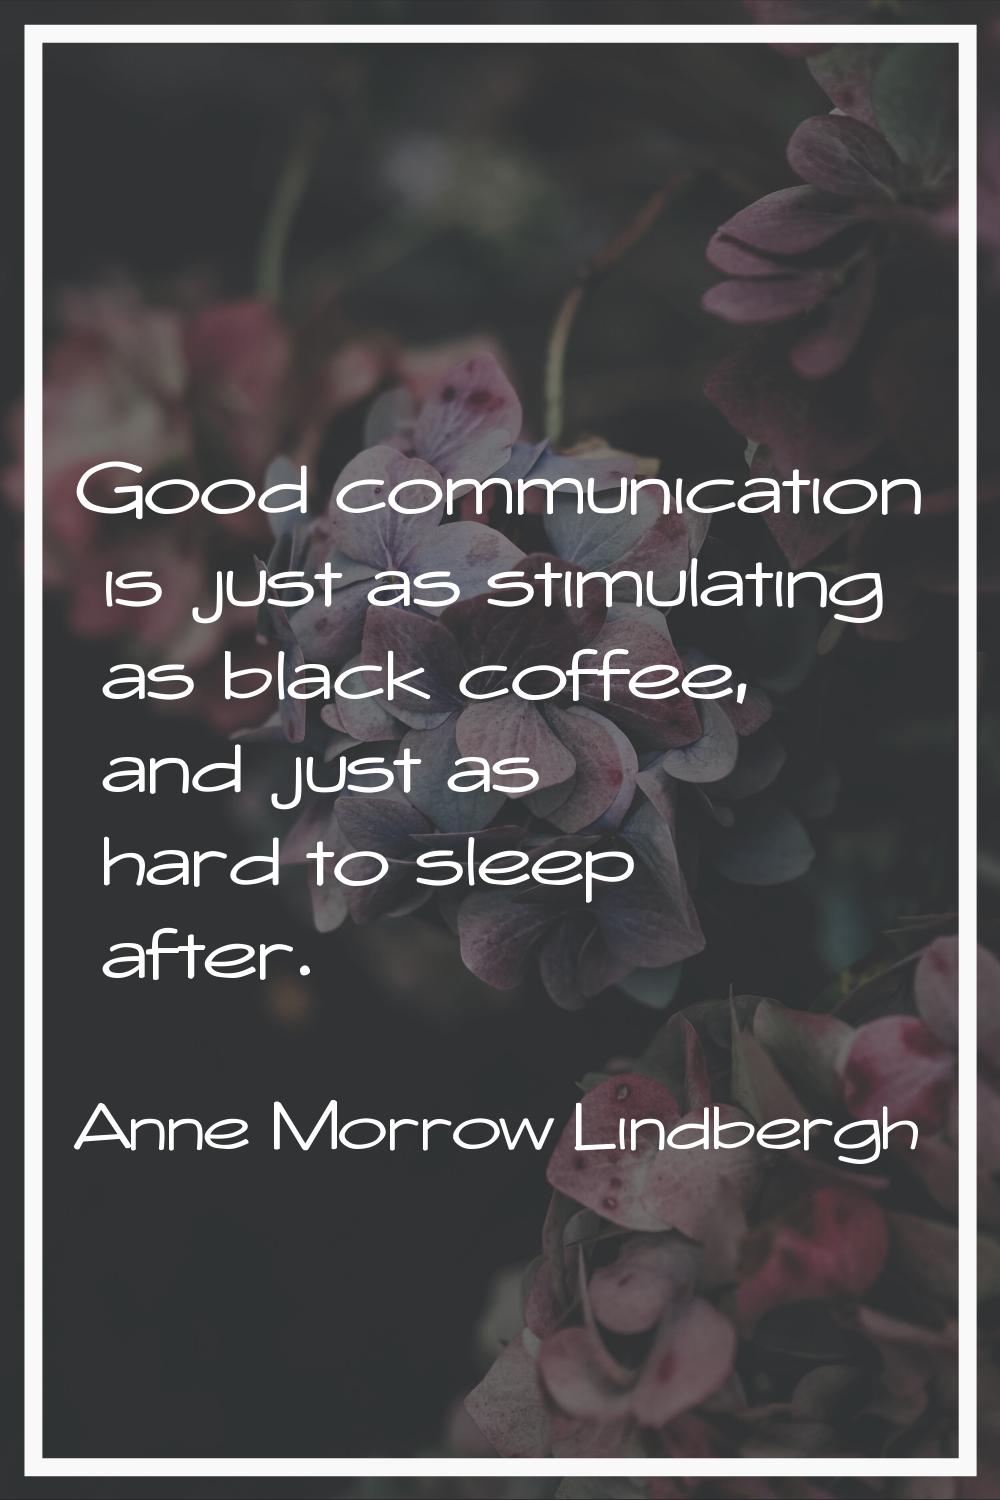 Good communication is just as stimulating as black coffee, and just as hard to sleep after.